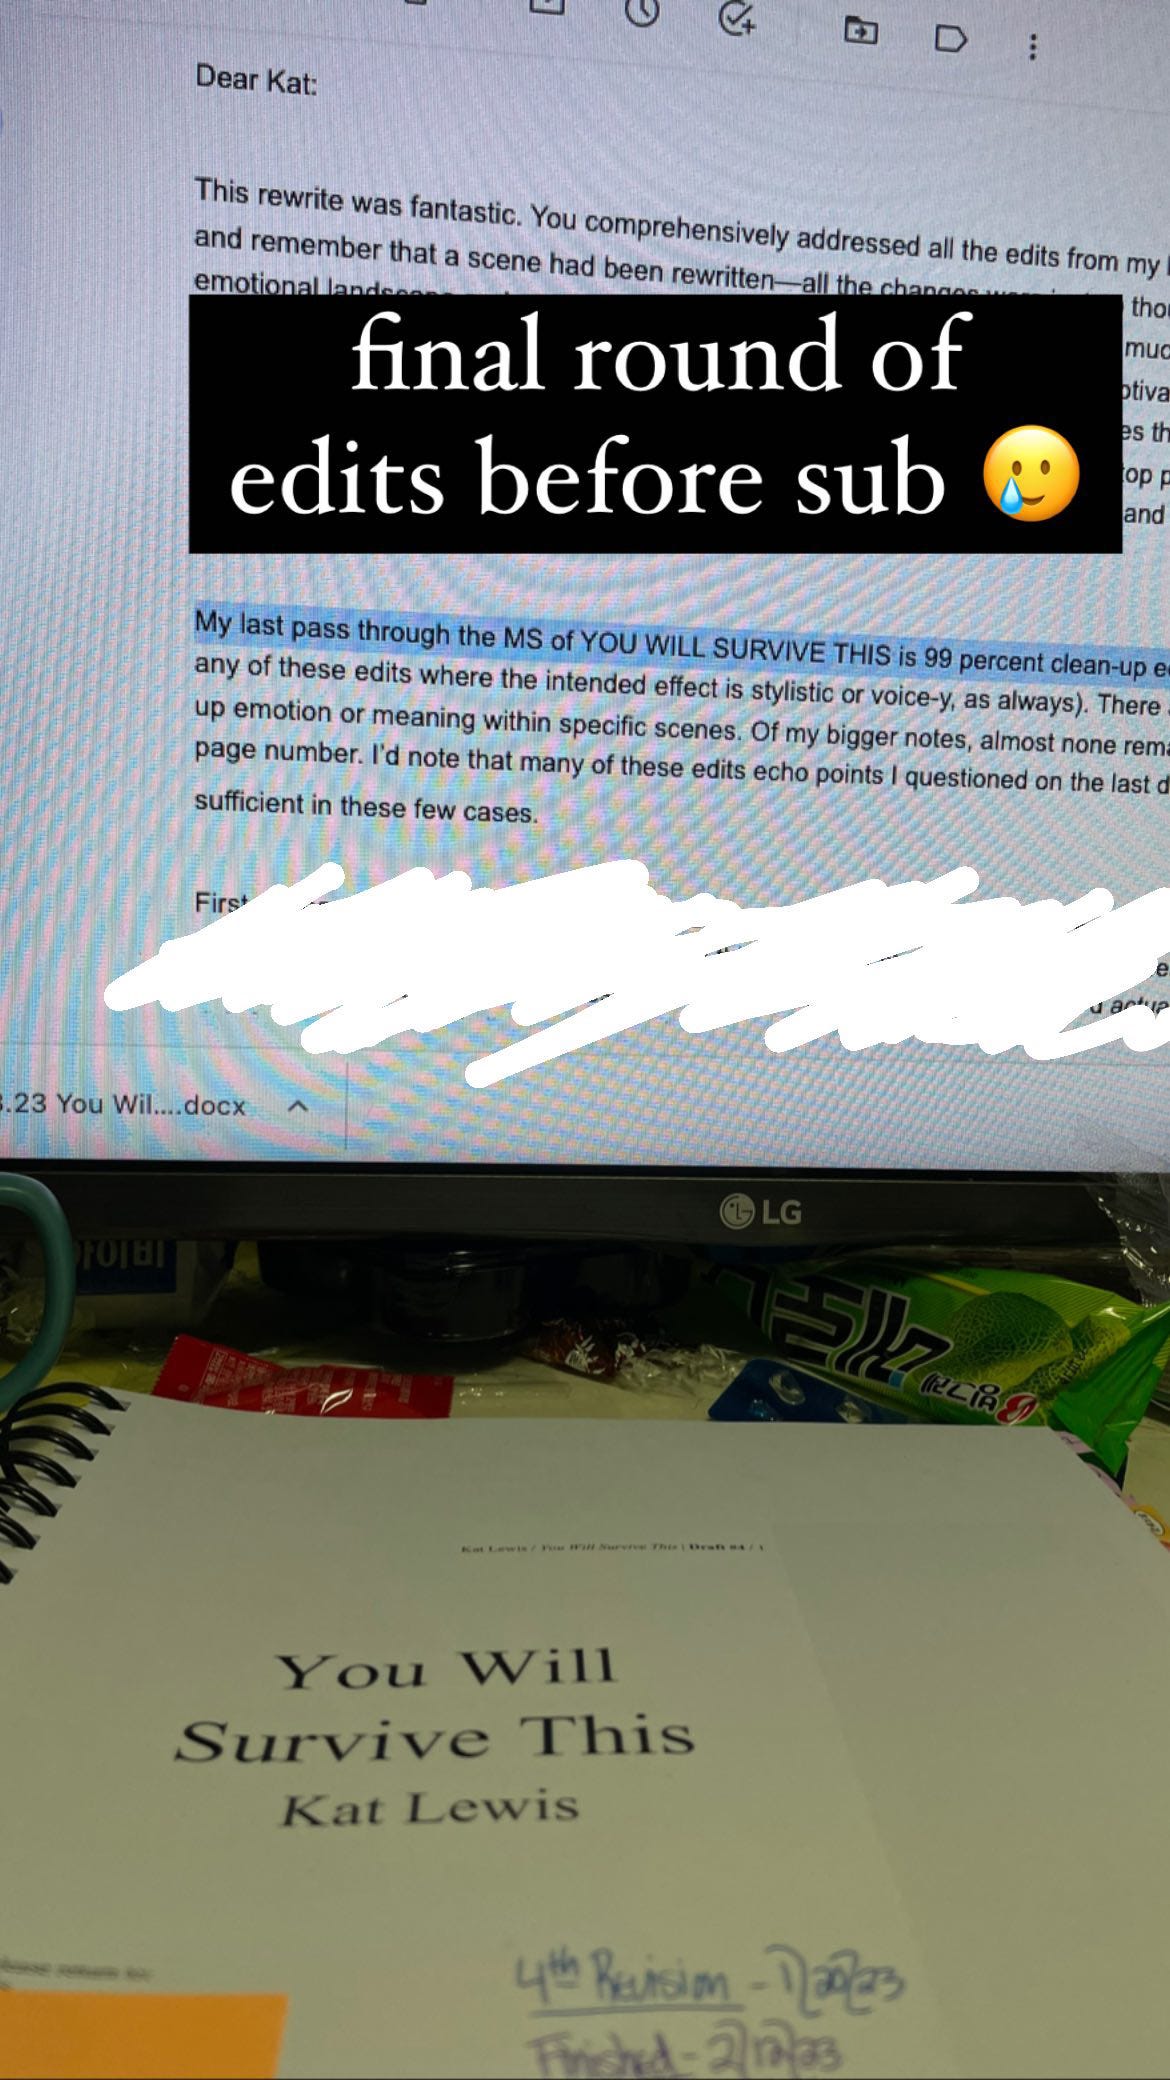 A photo of Kat’s computer monitor and her printed manuscript for You Will Survive THis. The monitor displays a redacted version of the edit letter from her agent. One sentence is legible: “My last pass through the MS of You Will Survive This is 99 percent clean-up edits.” Superimposed on the image is text that says, “Final Round of Edits before Sub.”